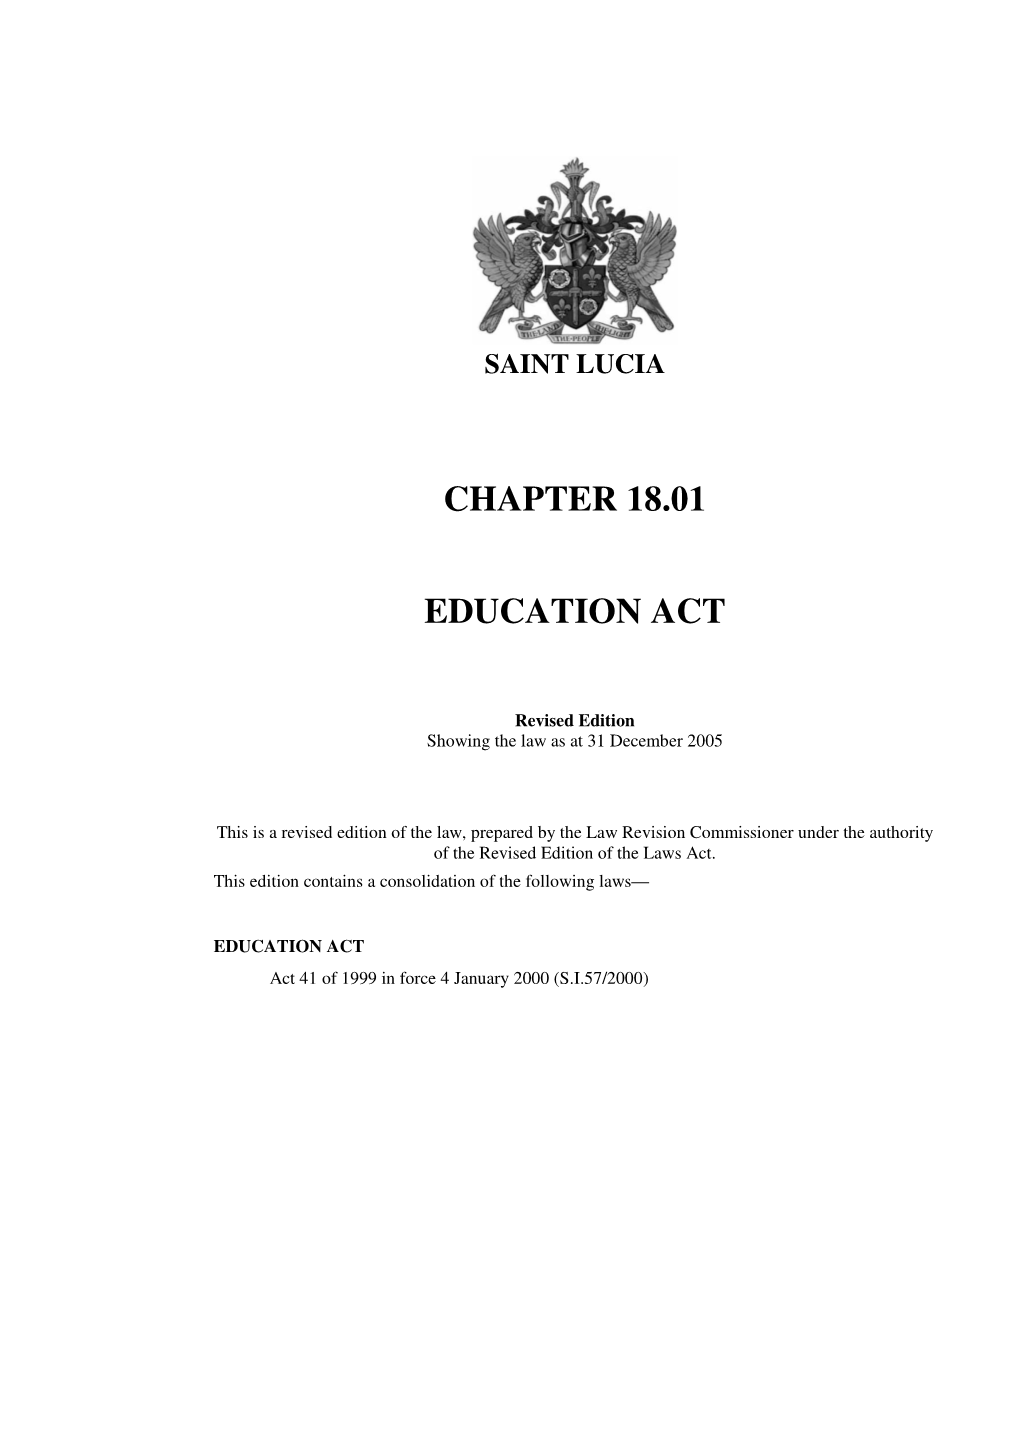 Education Act 2005